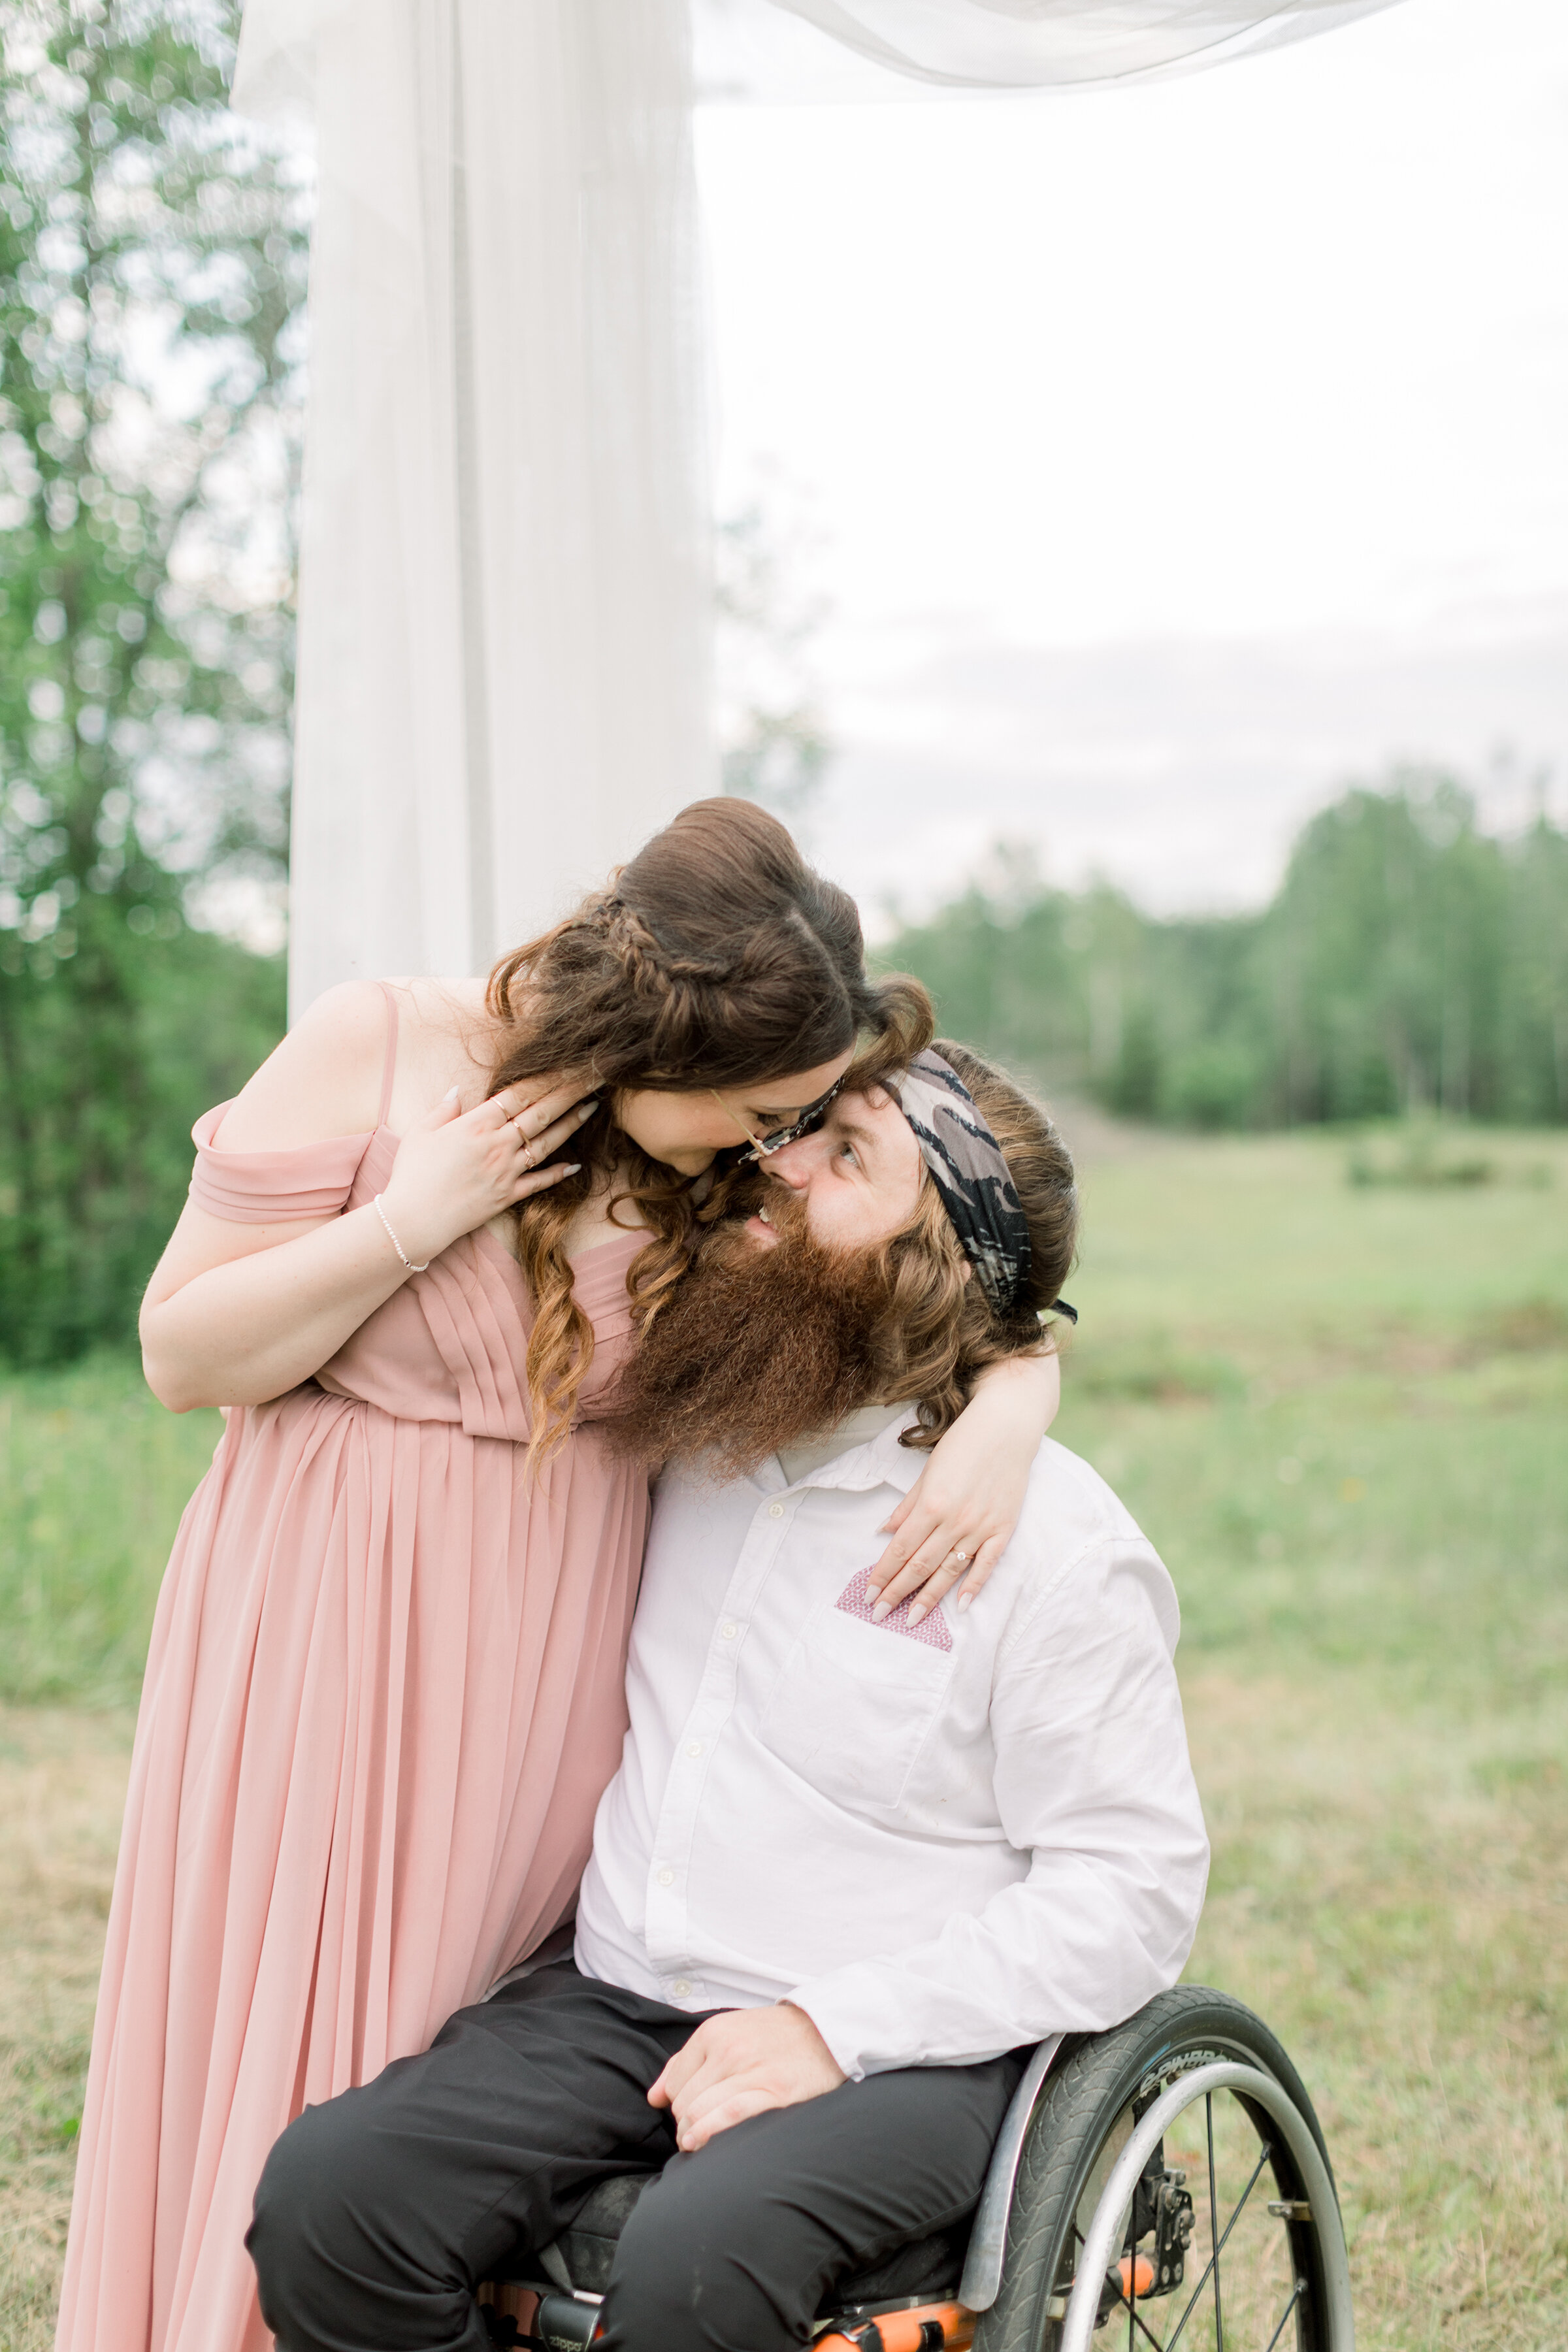  A paraplegic couple go in for a kiss under a elegant rustic arch in a beautiful engagement session by Chelsea Mason Photography in Smith Falls Ontario, Canada. Engagement session pose inspiration ideas and goals couple goals couple pose goals outdoo